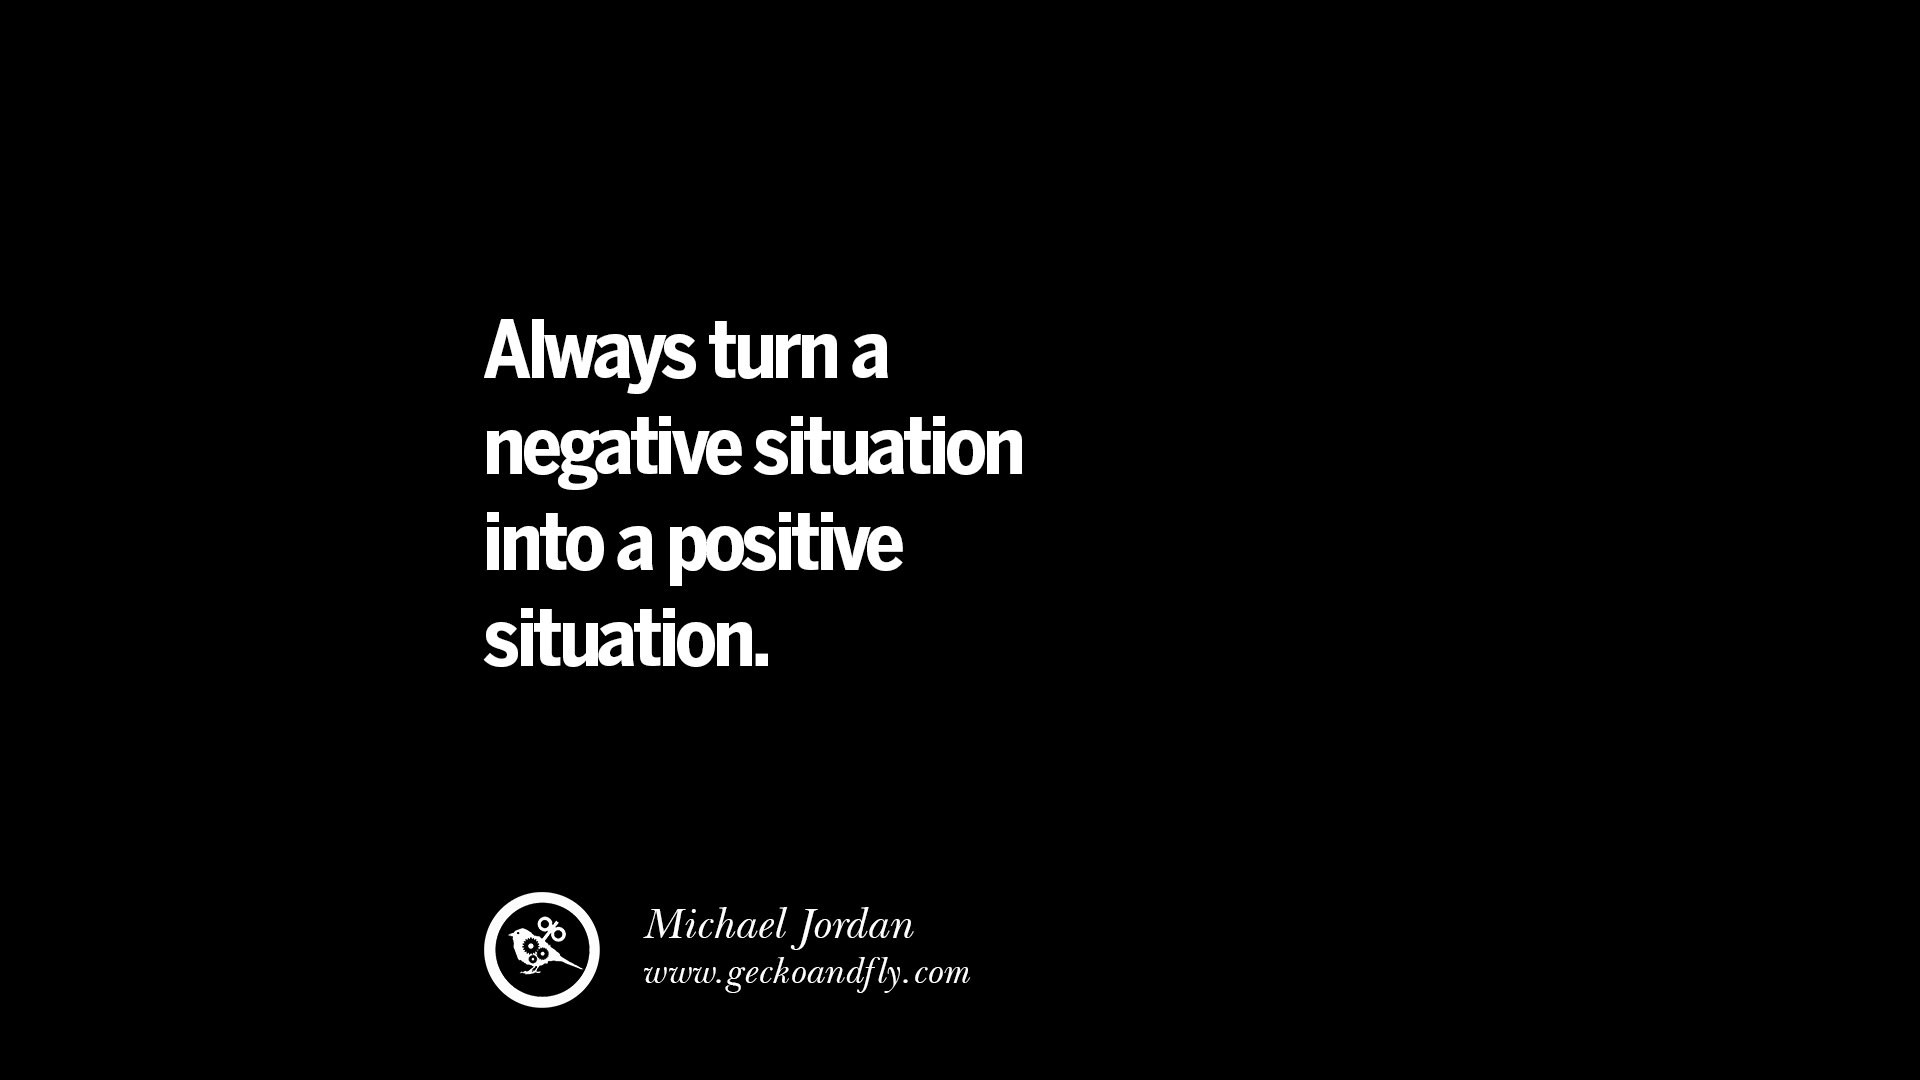 Turning Negatives Into Positives Quotes
 20 Inspirational Quotes on Positive Thinking Power and